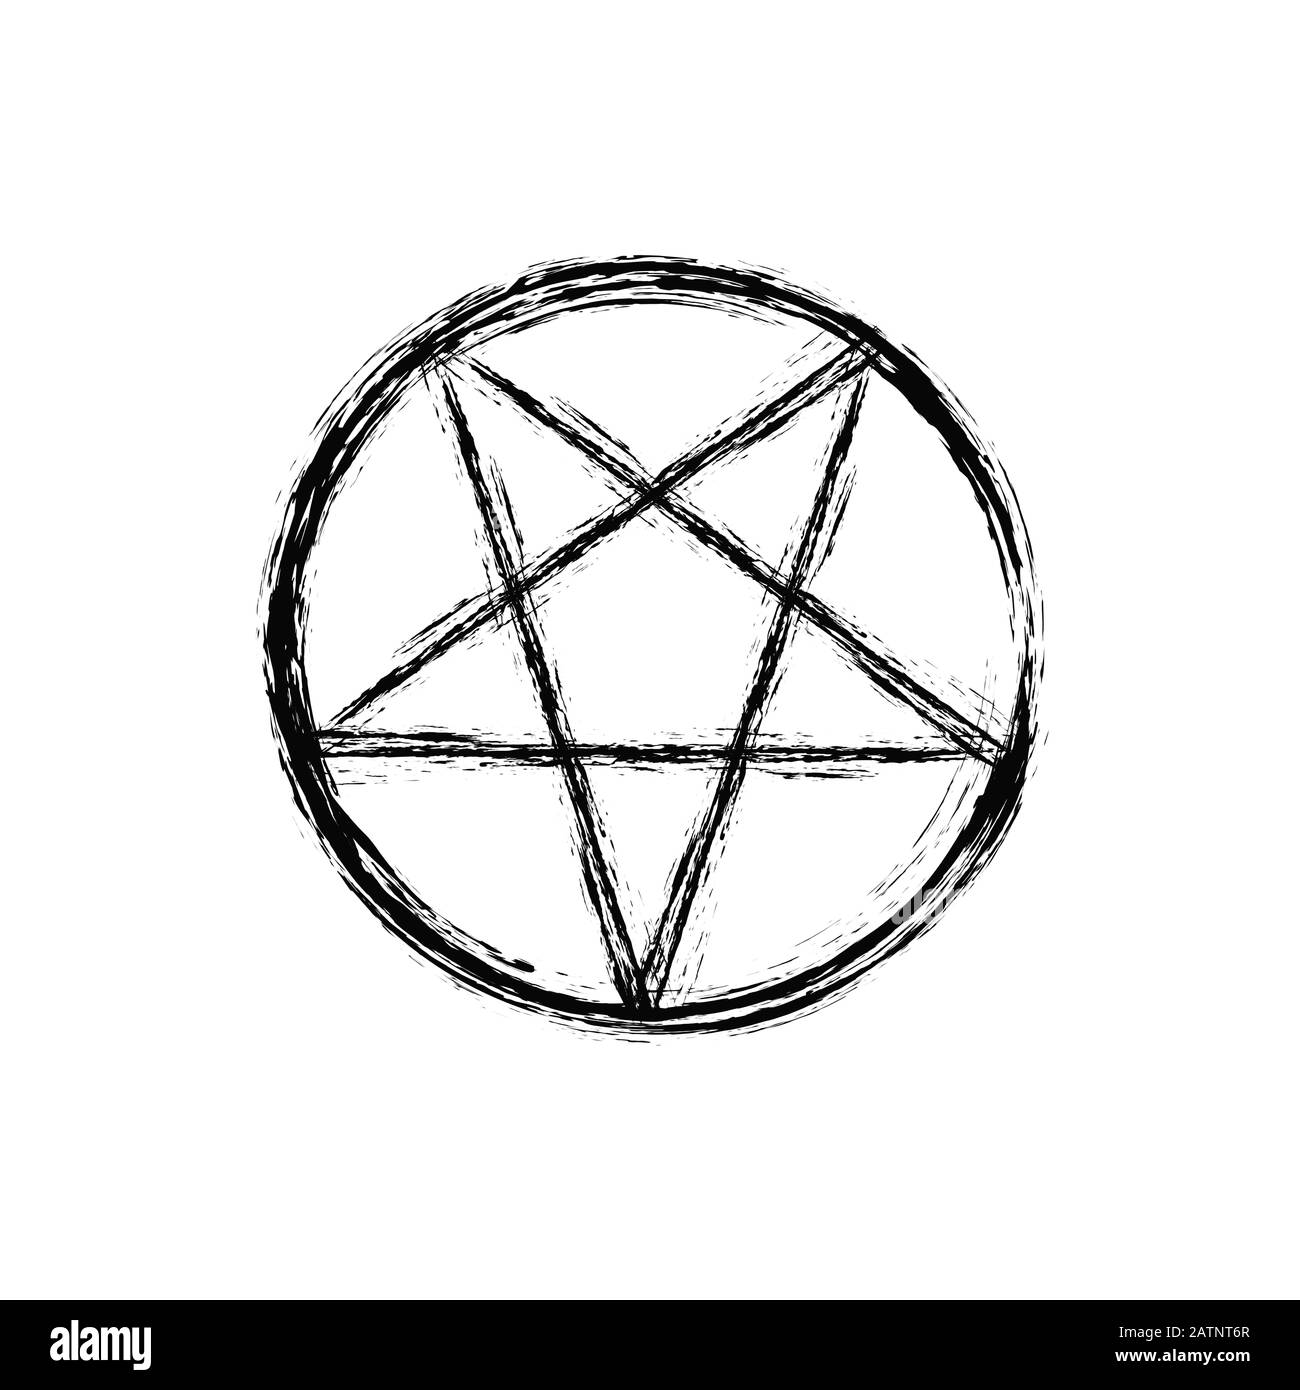 Reversed pentagram drawing isolated over white background Stock Photo